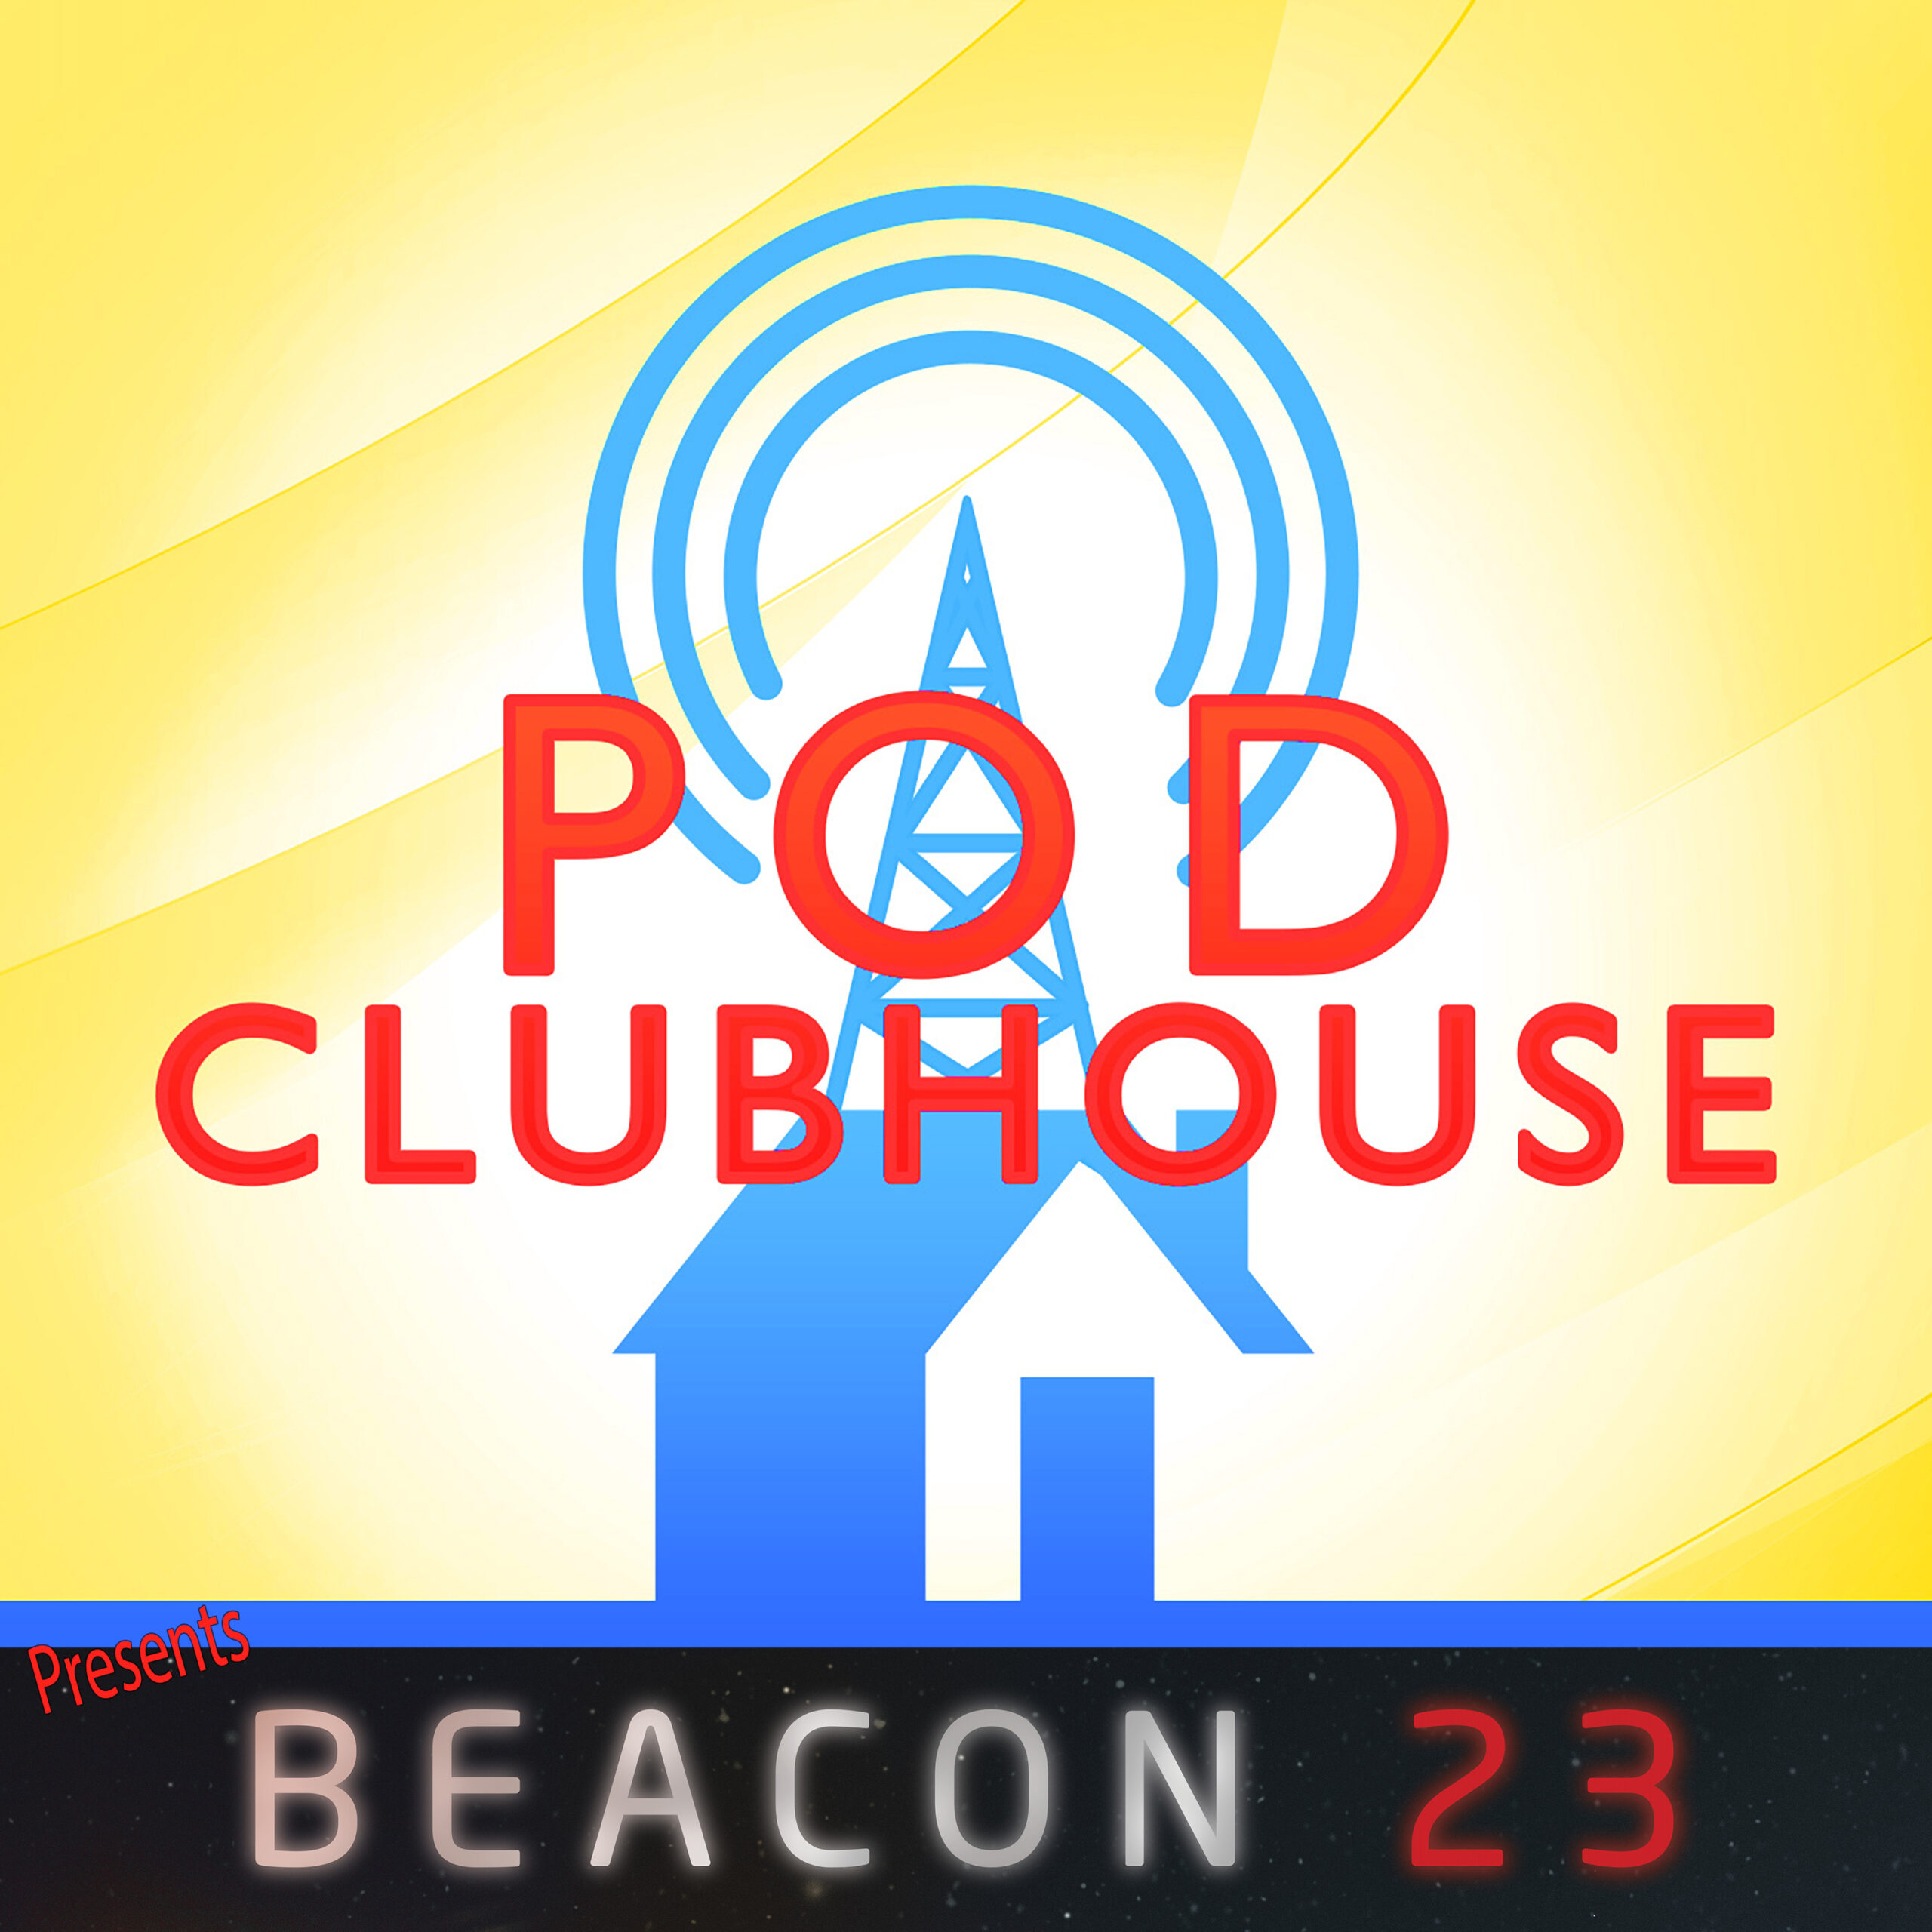 3 Hosts In a Beacon - Pod Clubhouse's Beacon 23 Podcast